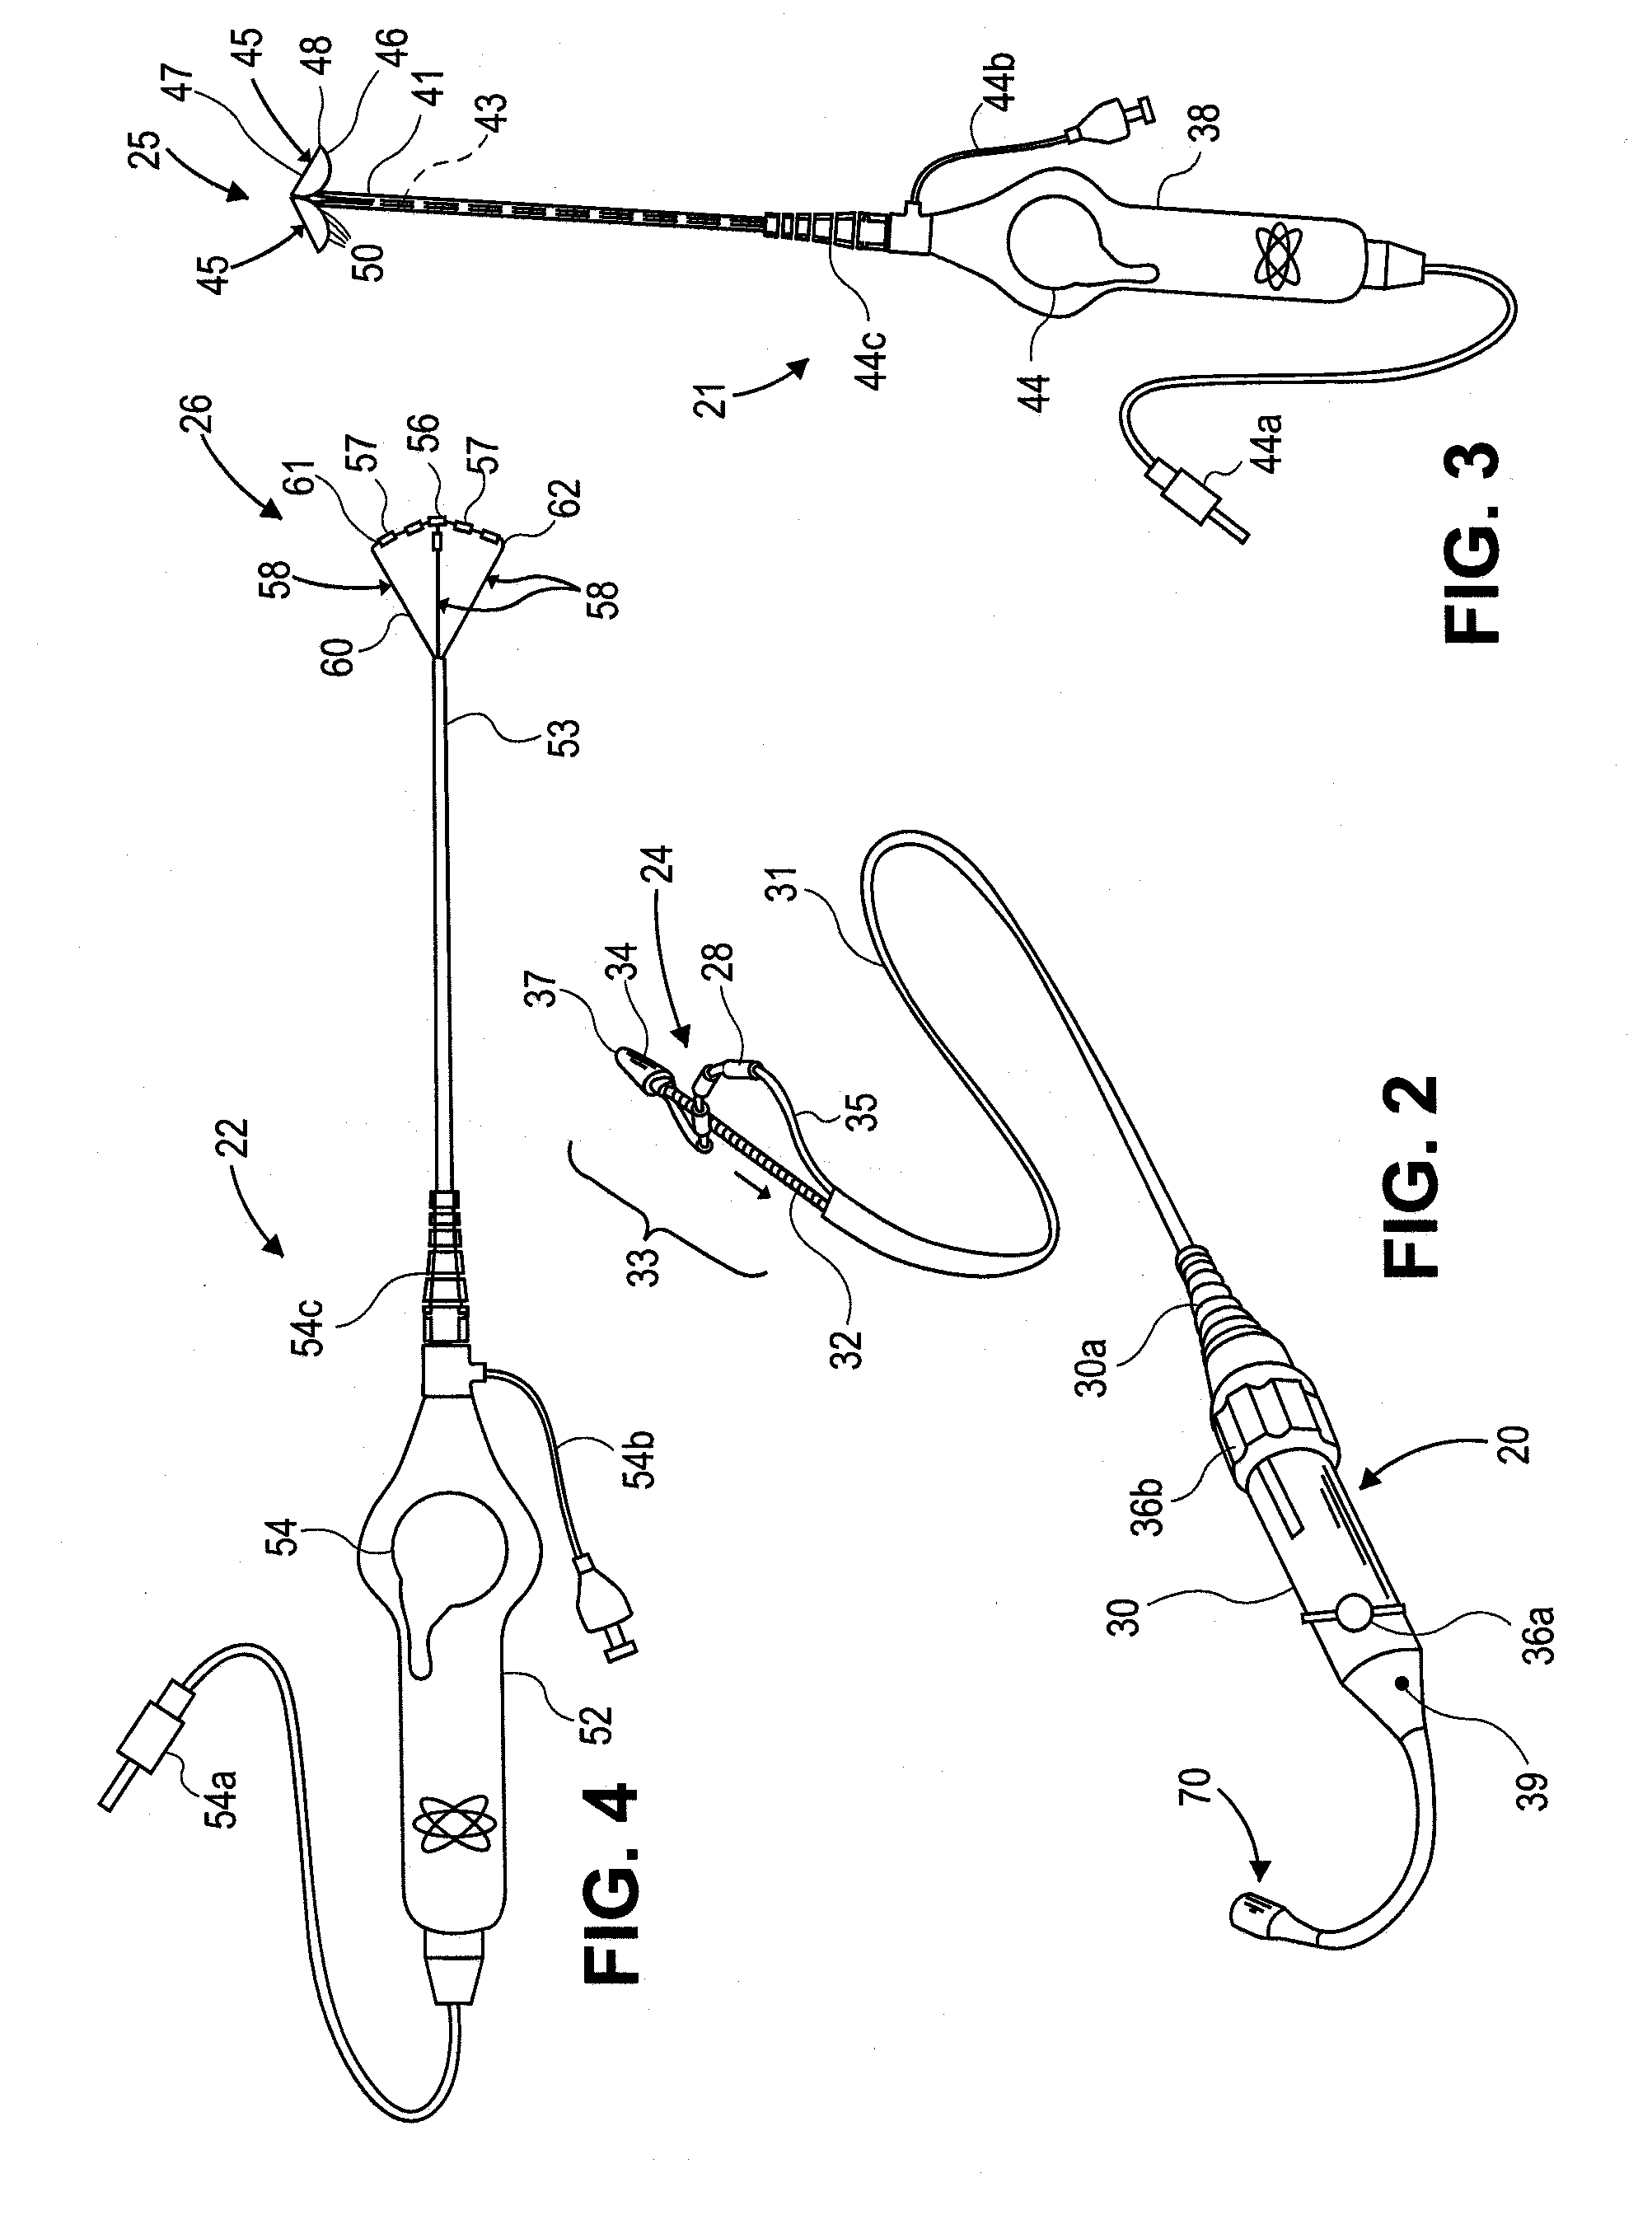 Ablation Therapy System and Method for Treating Continuous Atrial Fibrillation